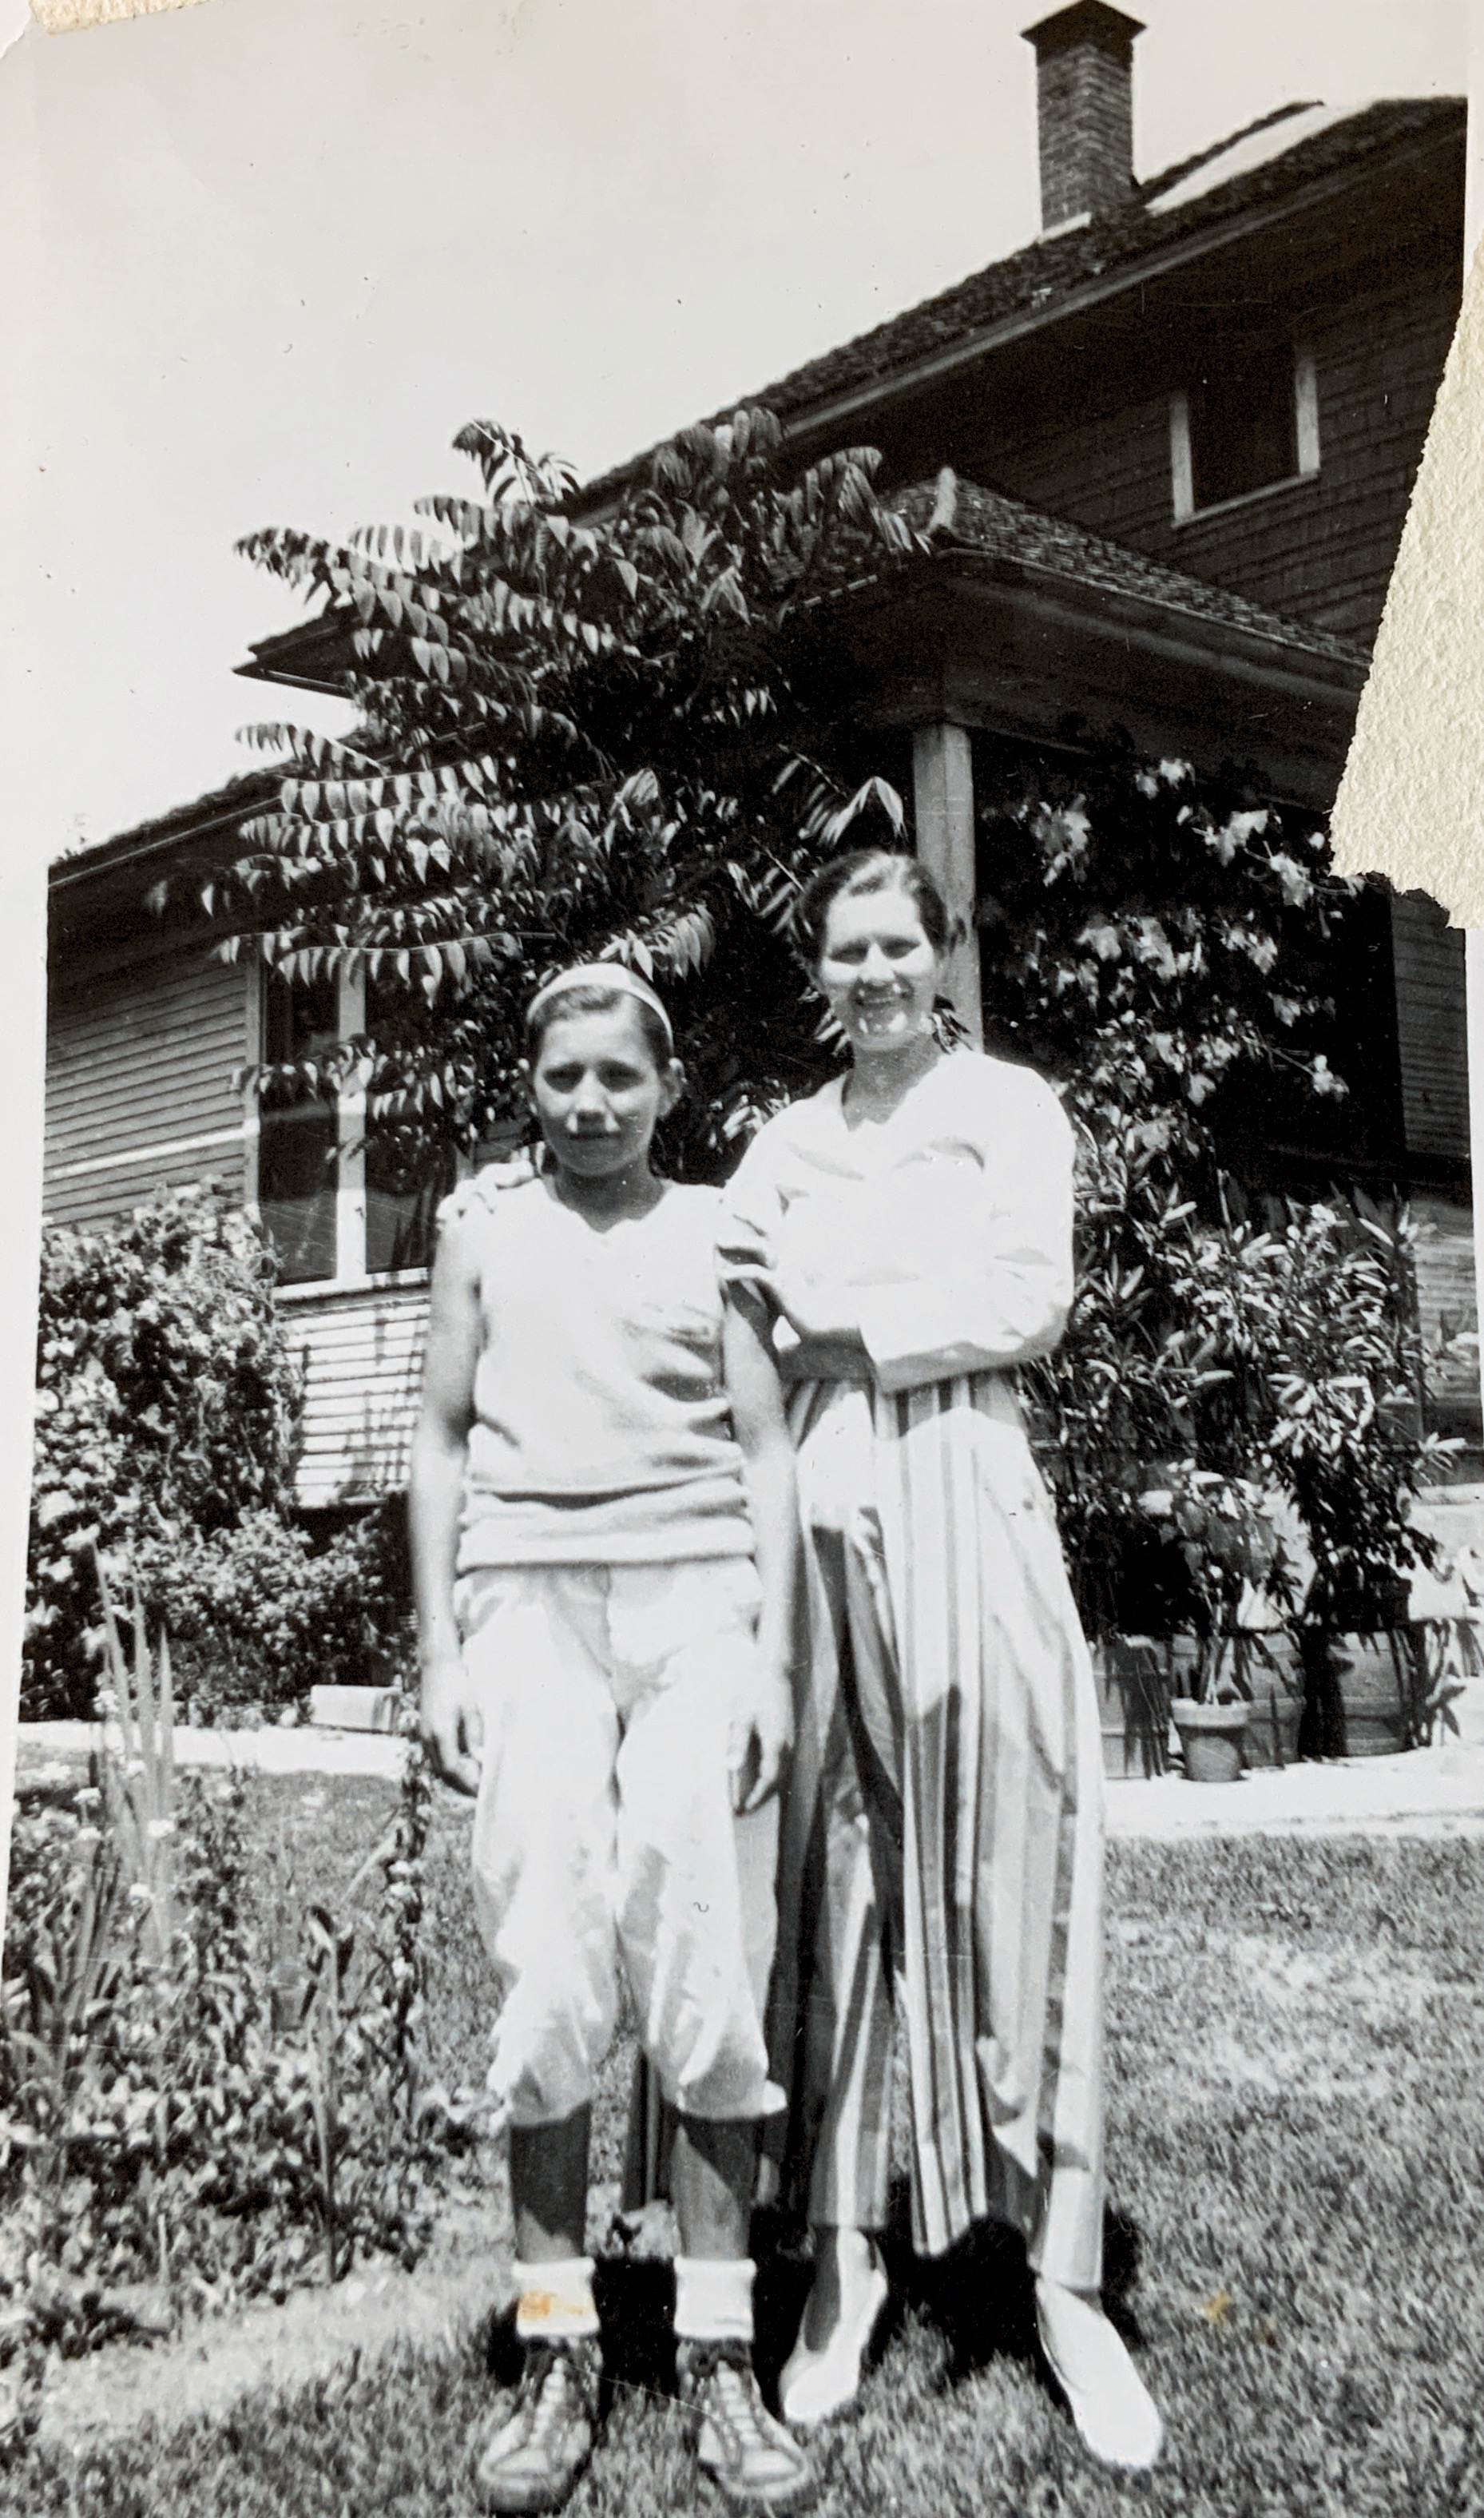 Siblings: Steve and Pearl Wachowiak about 1930. On Park Street SW.